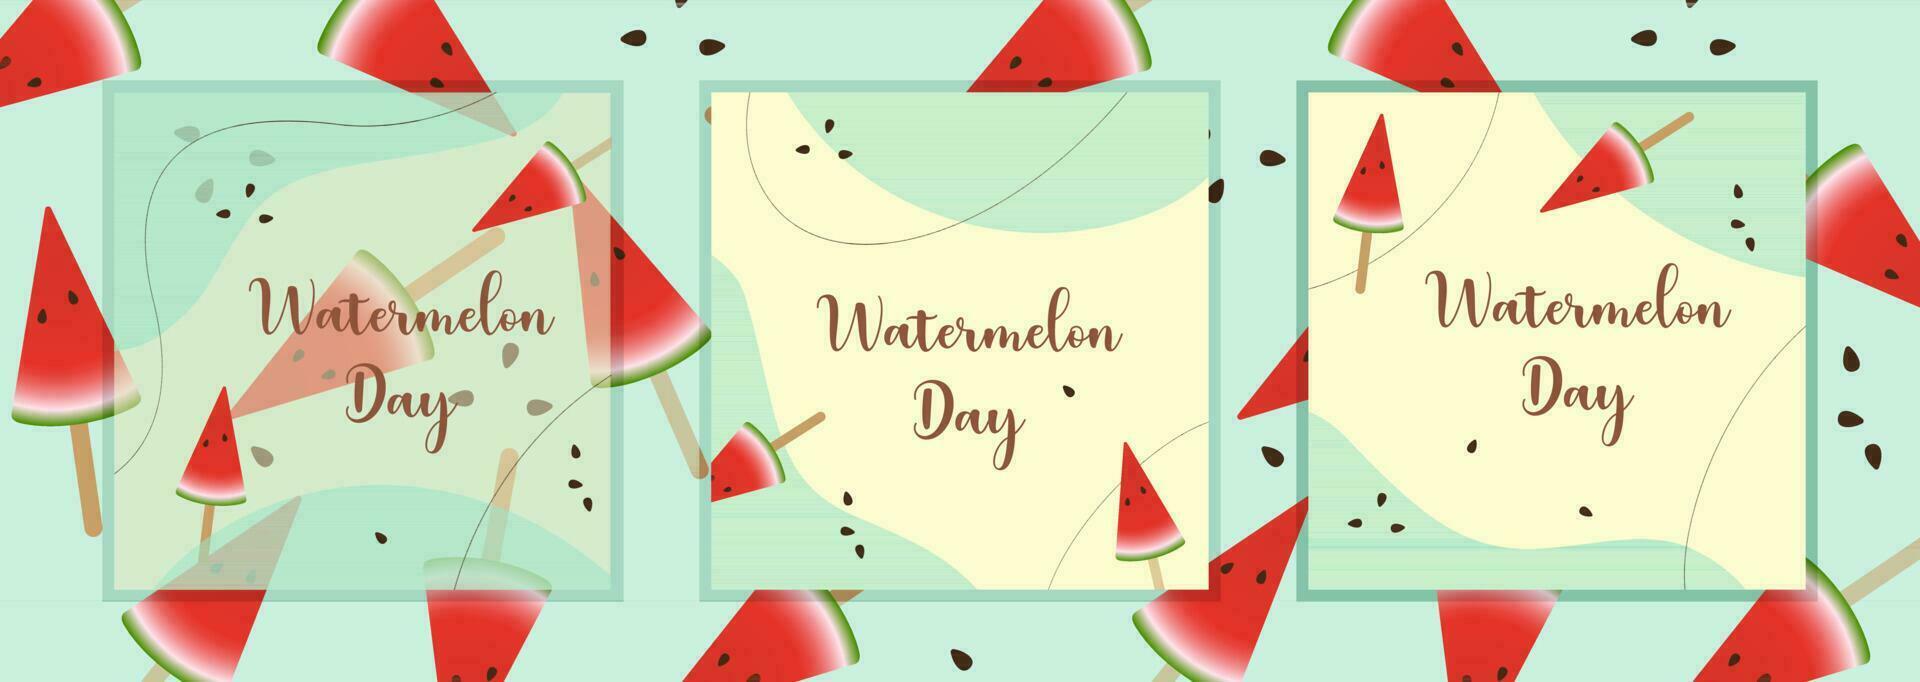 Watermelon day posters and pattern, background boho style, banners set and pattern background. vector